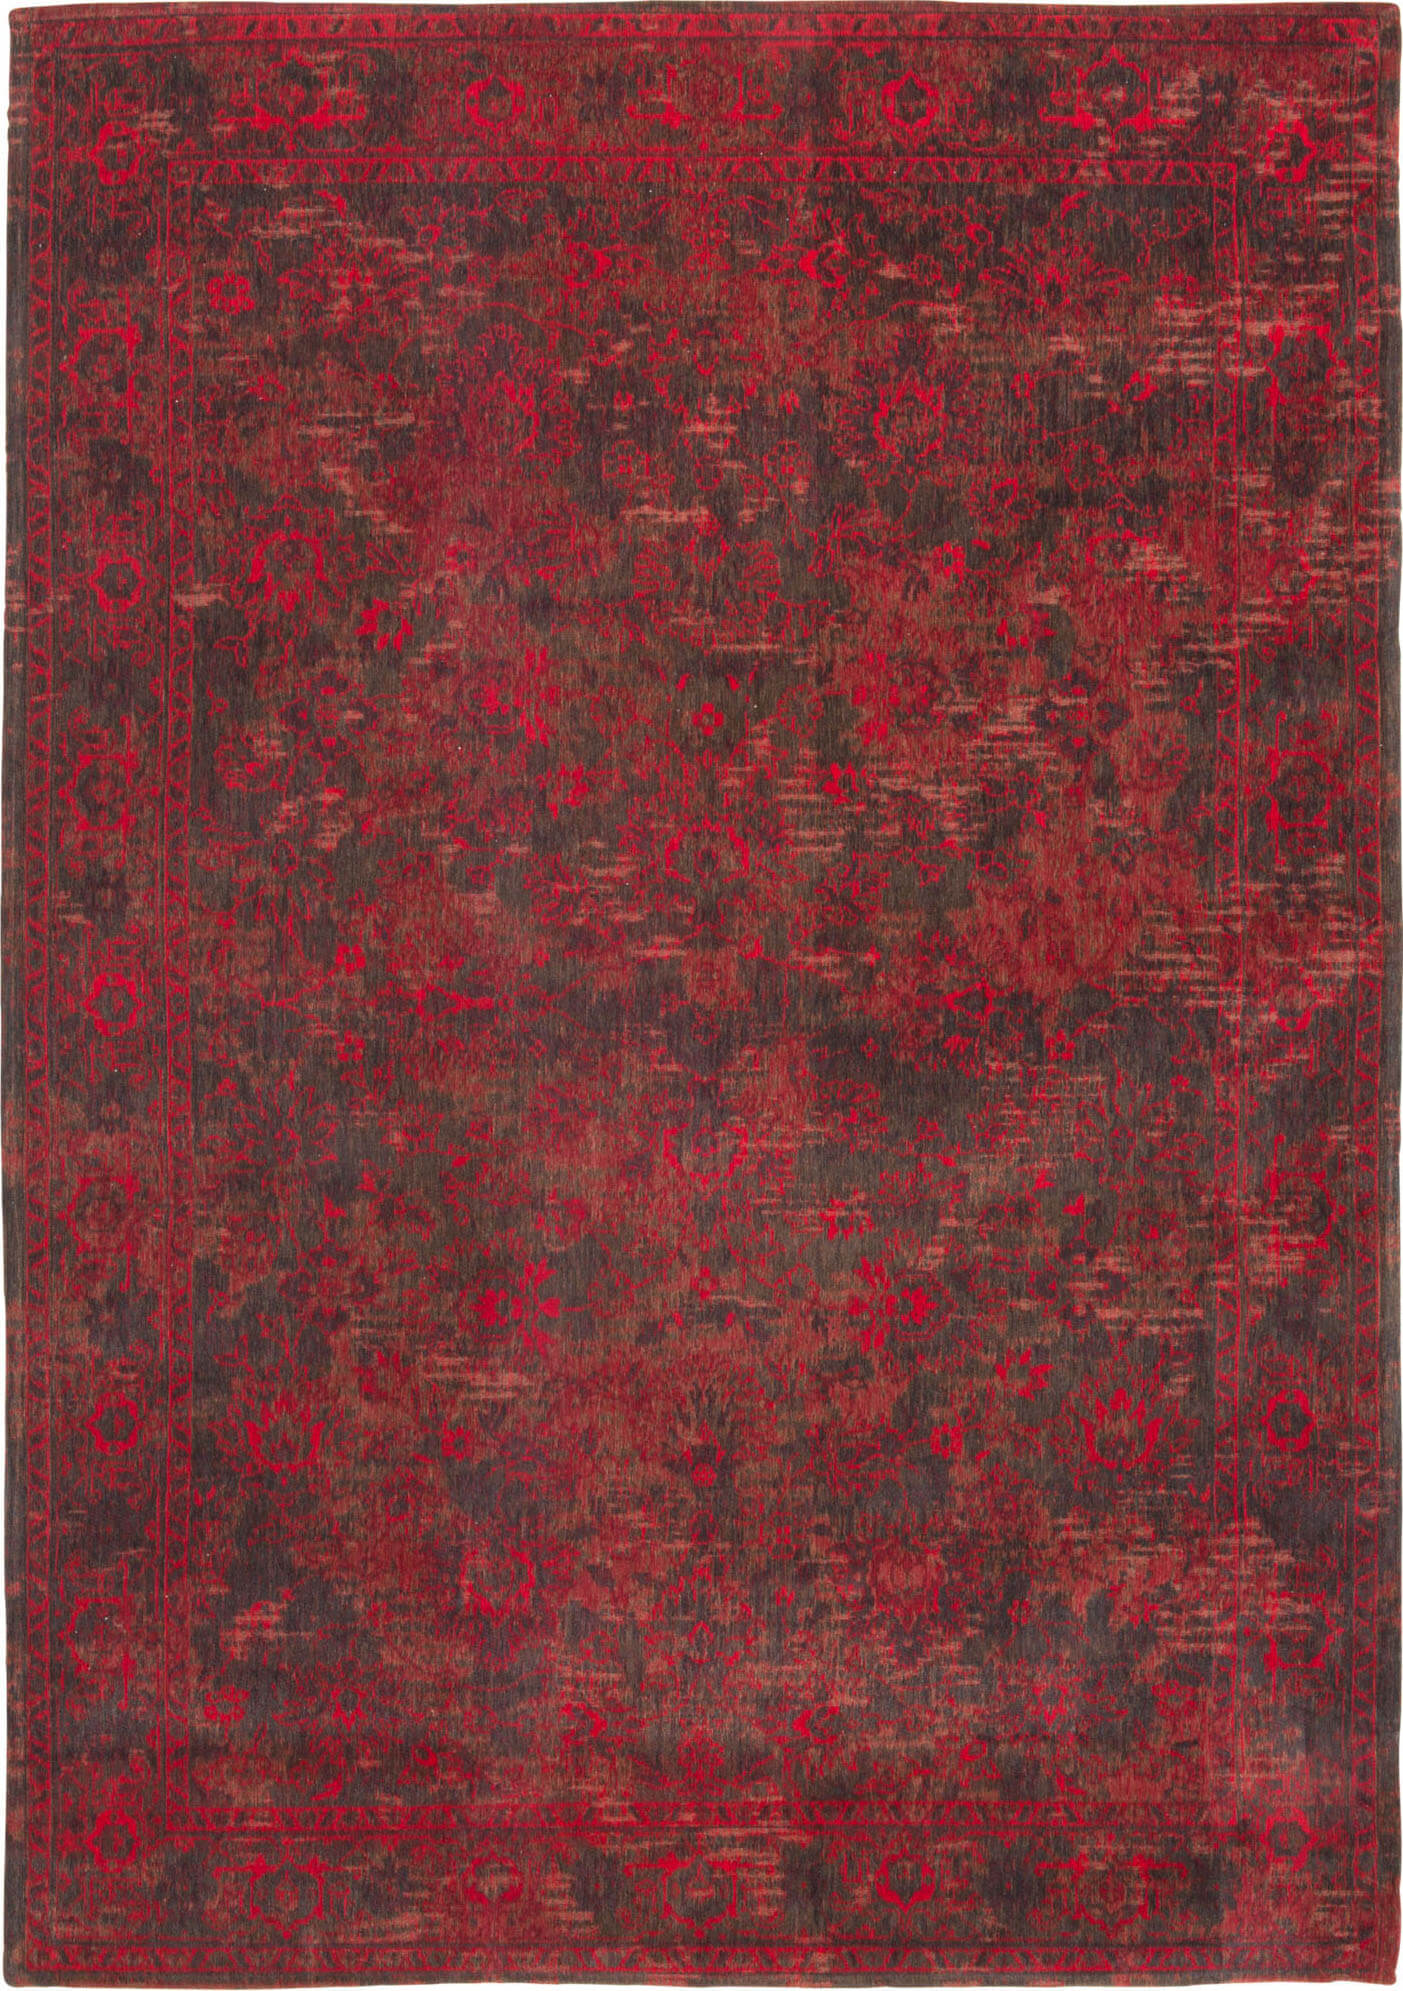 Grey Red Bright Persian Vintage Rug ☞ Size: 230 x 330 cm